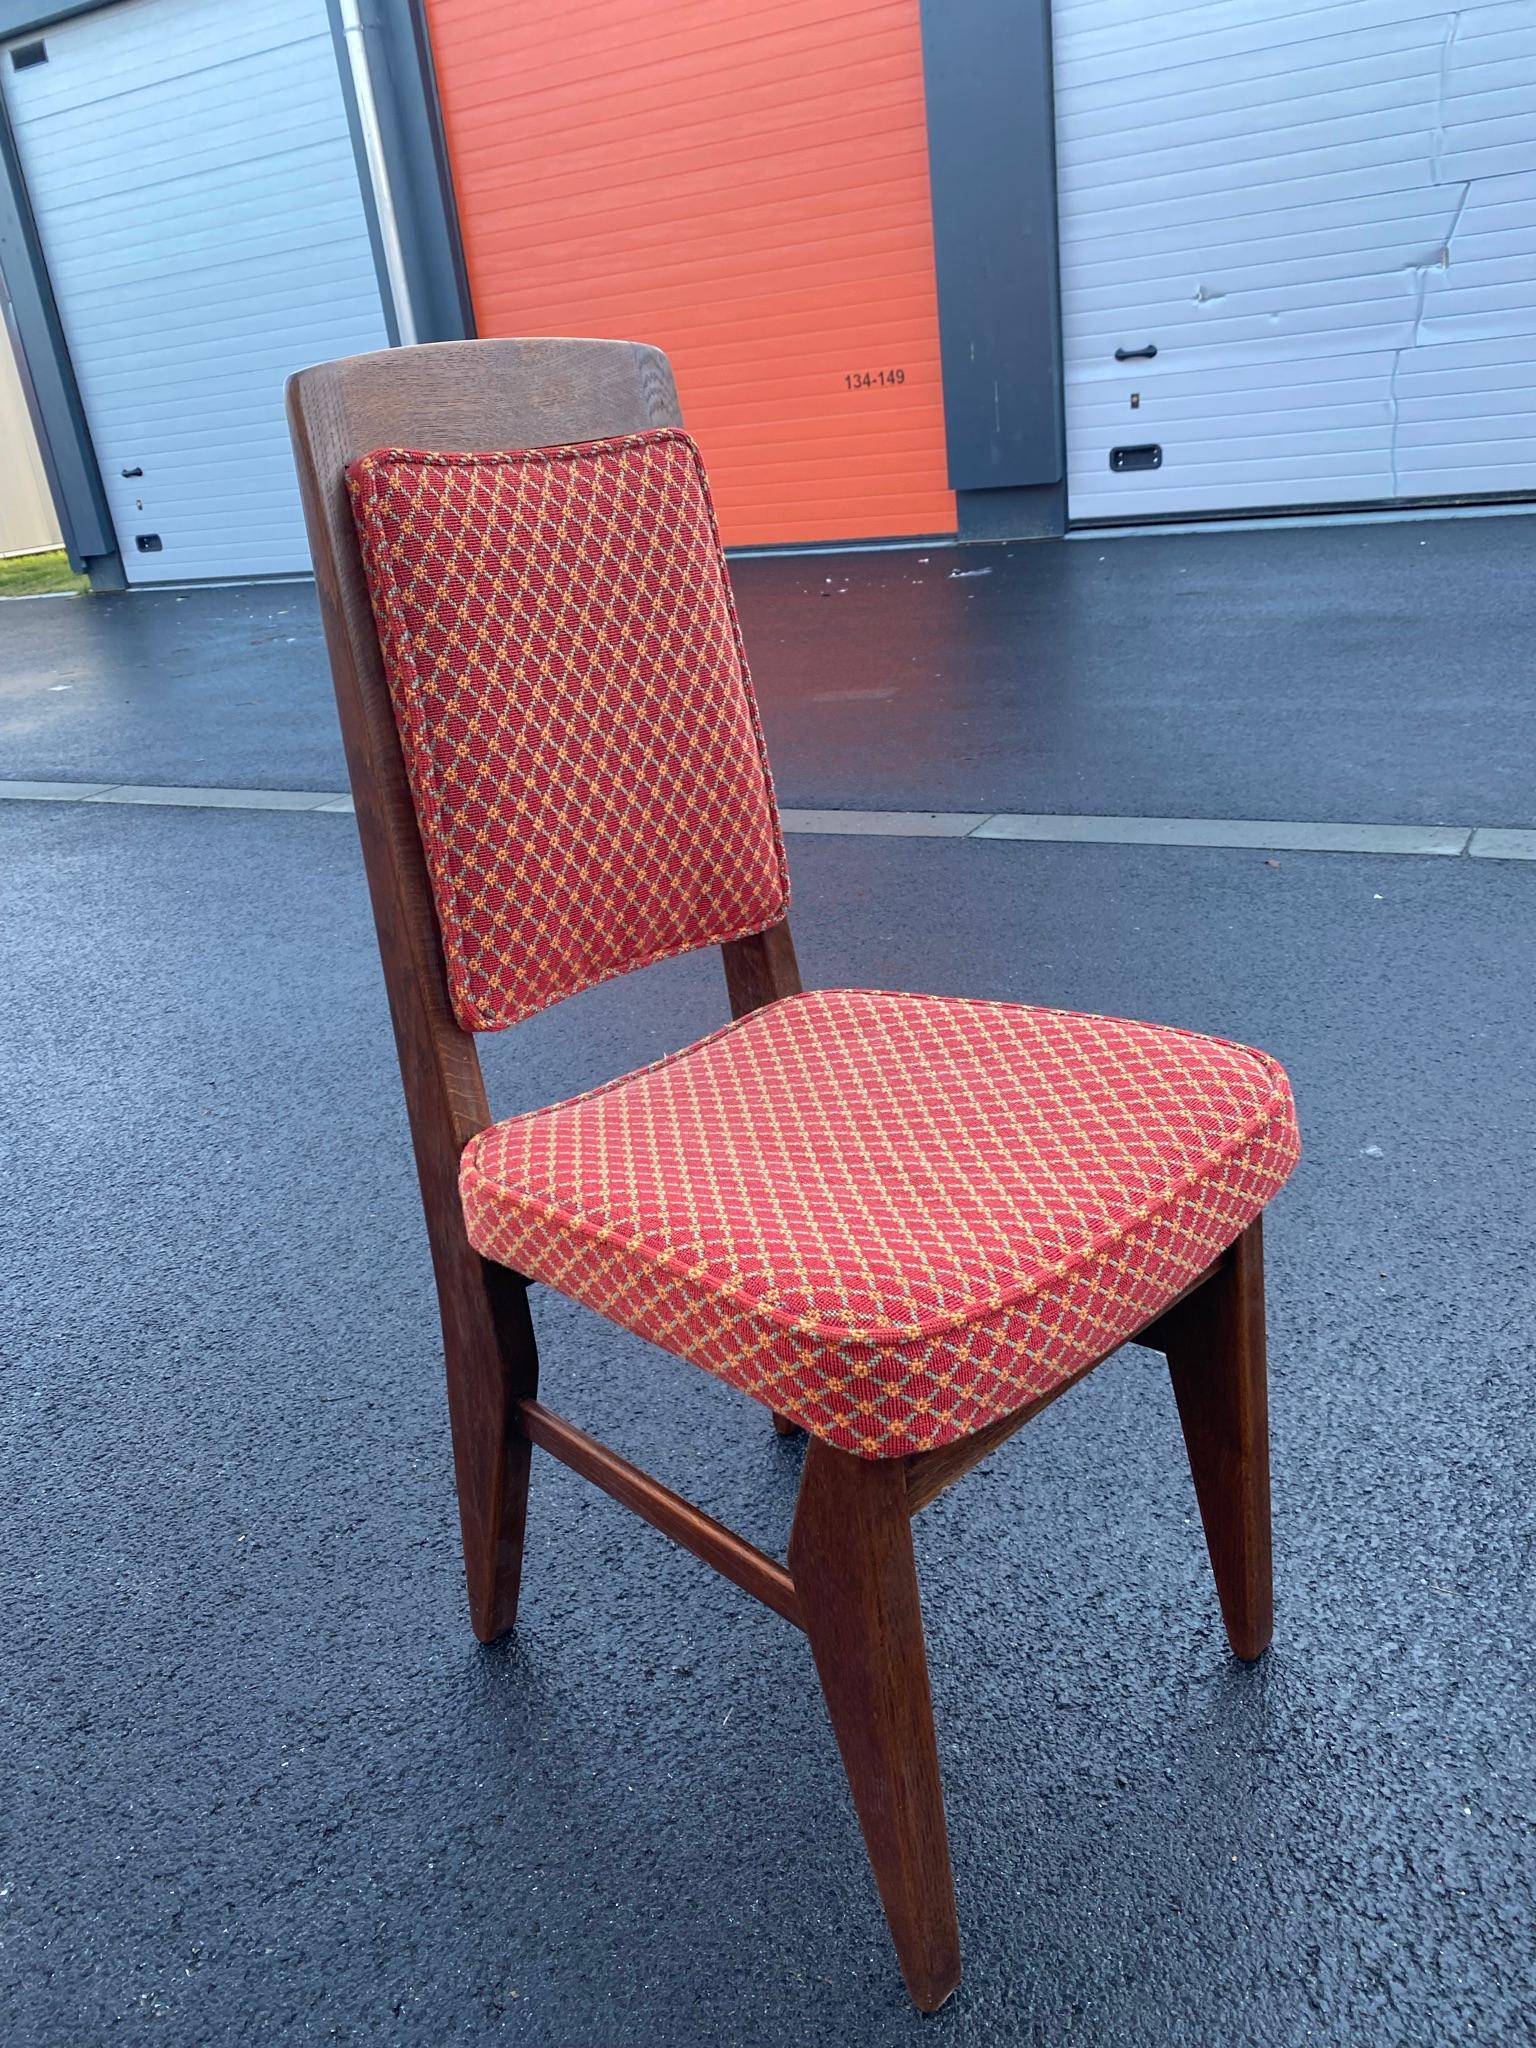 Guillerme et Chambron, 8 oak chairs. Edition Votre Maison, circa 1970.
4 model chairs are also available in another ad
so there are 12 chairs available (8 + 4 because different fabric).

 